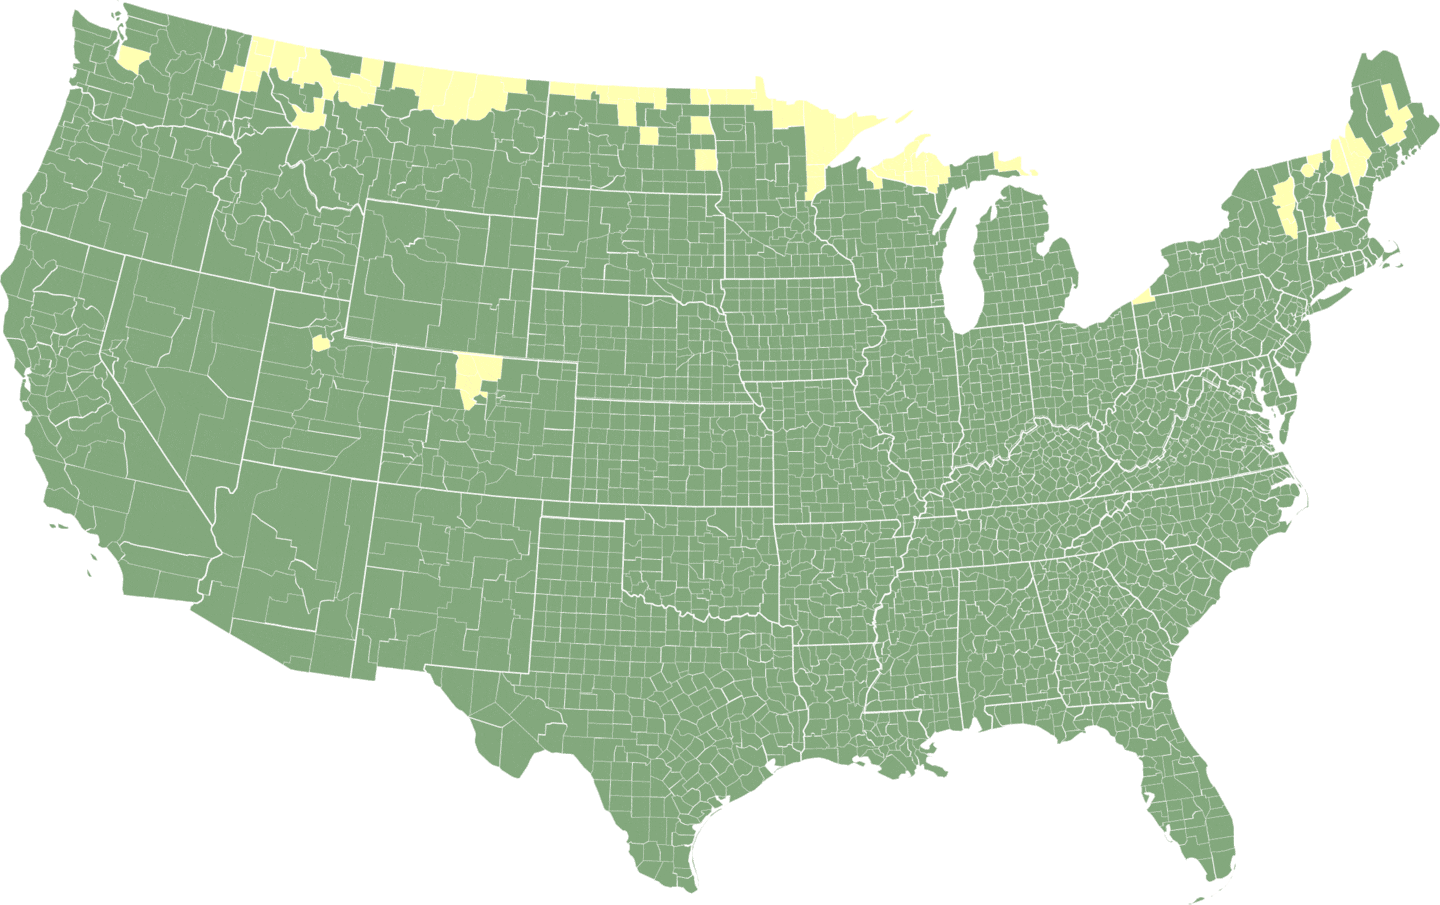 Animated map of when the leaves in the United States are projected to change